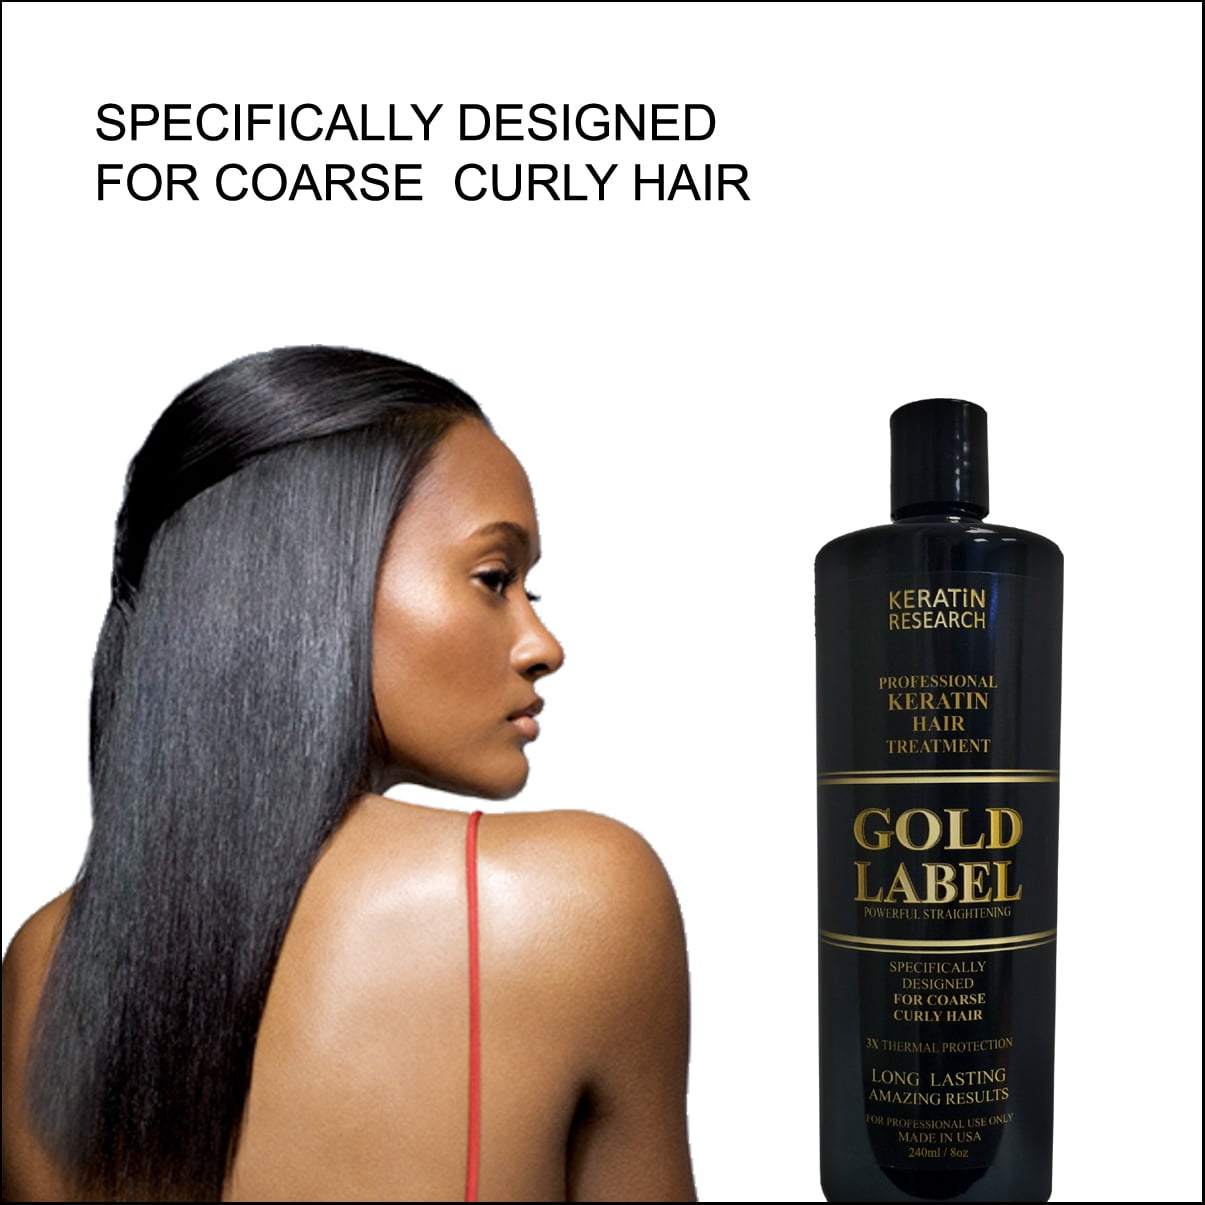 Keratin Research Gold Label Professional Blowout Keratin Hair Treatment  Super Enhanced Formula Specifically Designed for Coarse Curly Black,  African, Dominican and Brazilian Hair types 240ml 